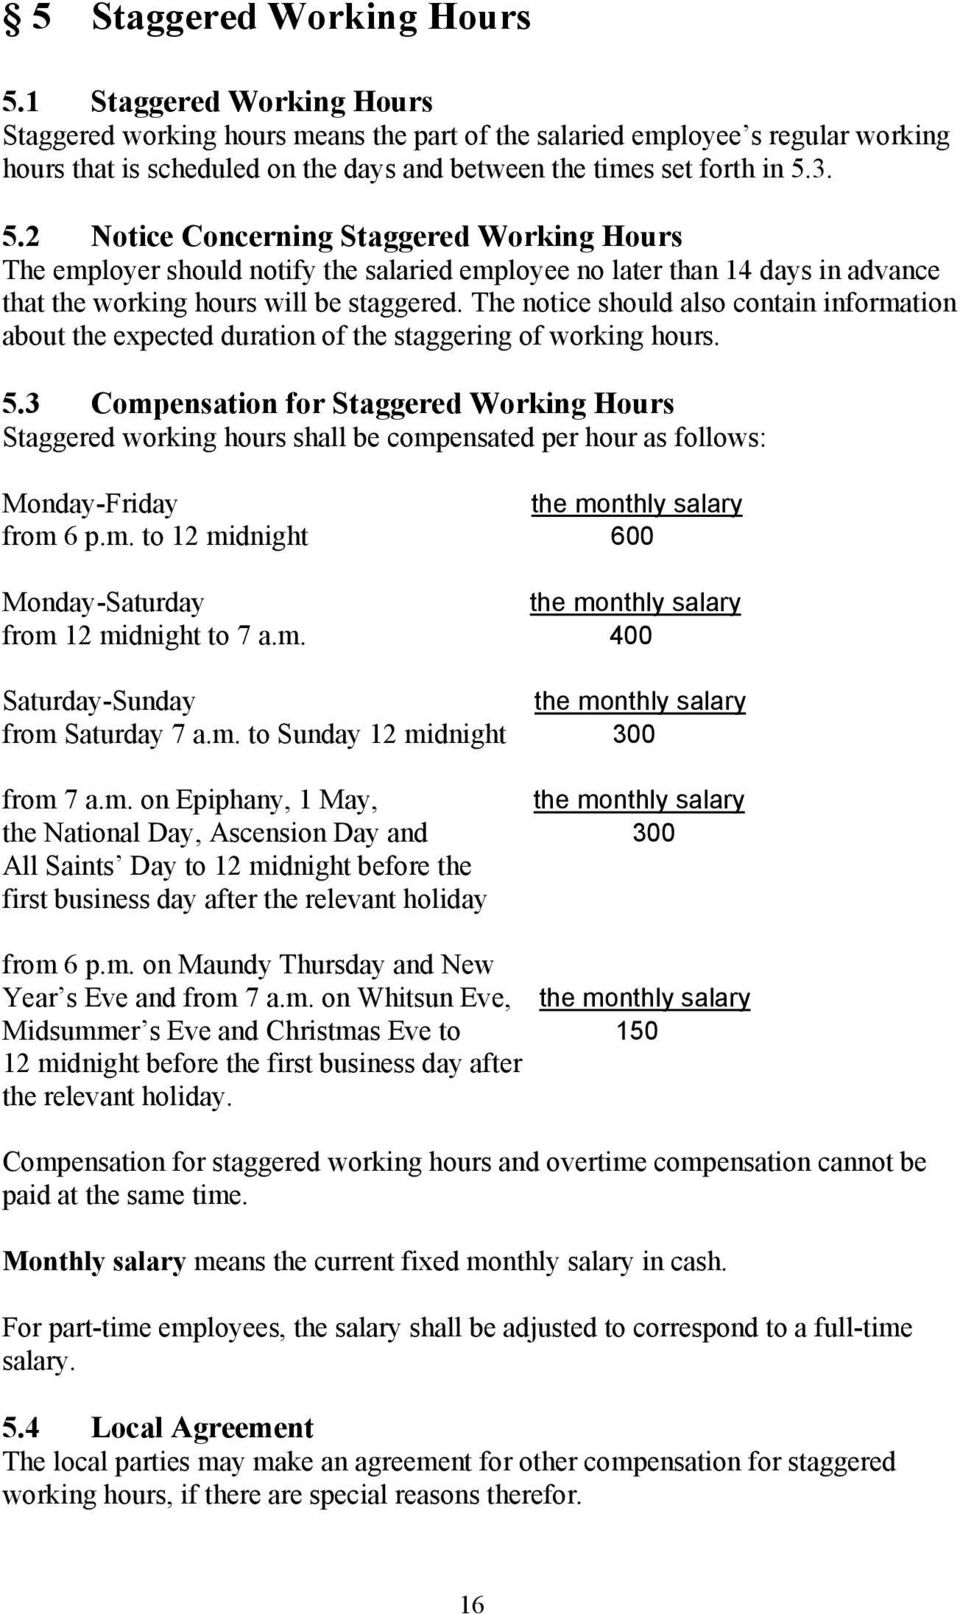 3. 5.2 Notice Concerning Staggered Working Hours The employer should notify the salaried employee no later than 14 days in advance that the working hours will be staggered.